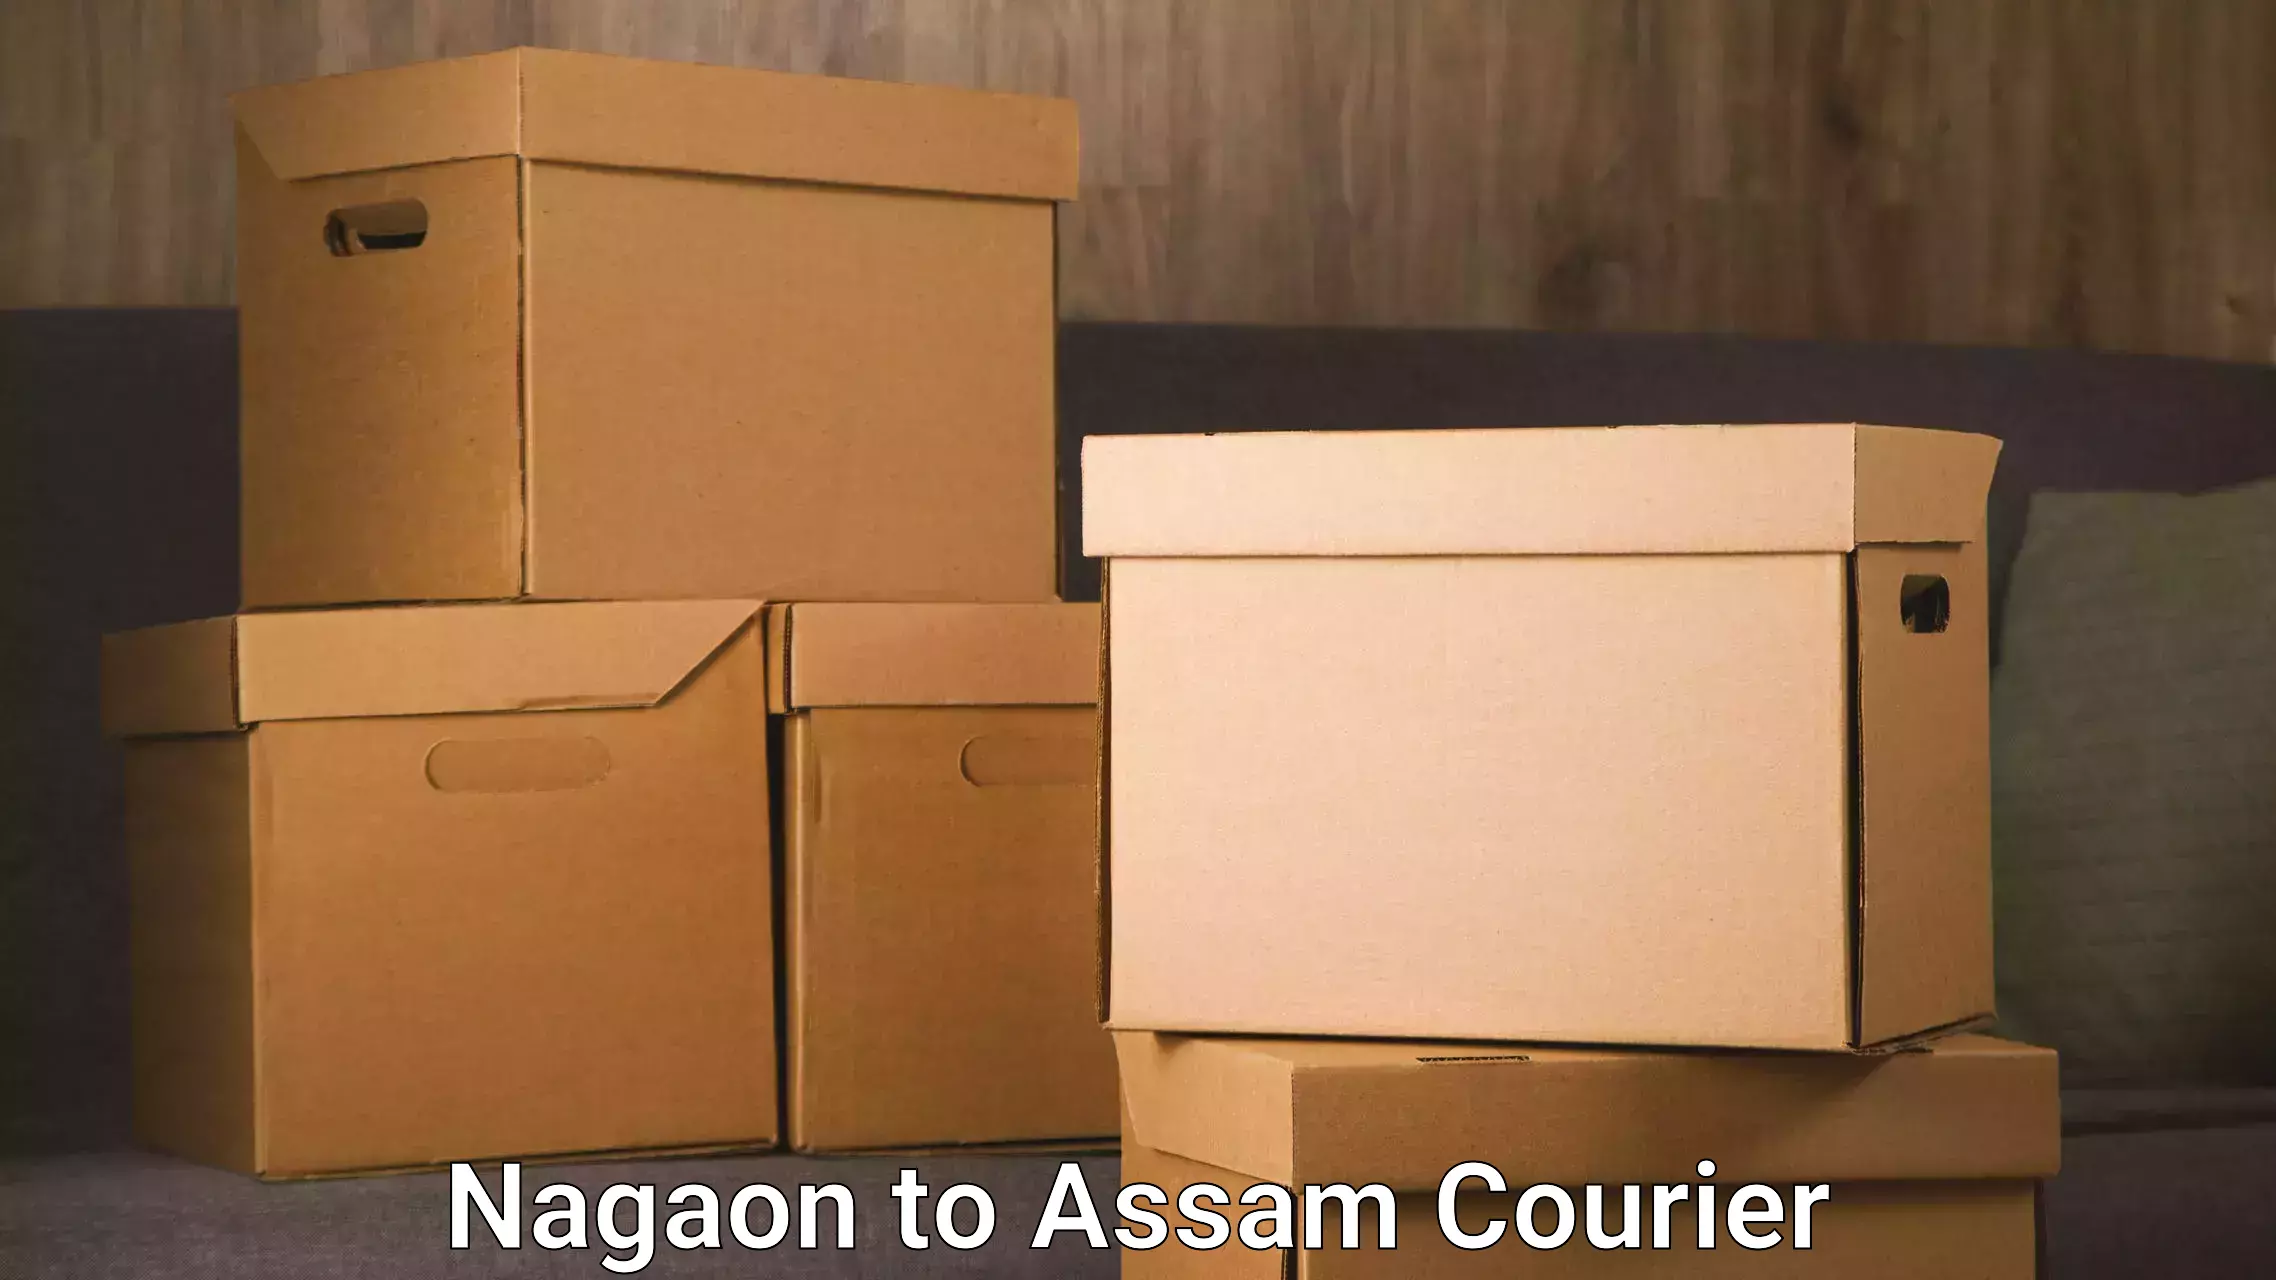 Next day courier in Nagaon to Bijni